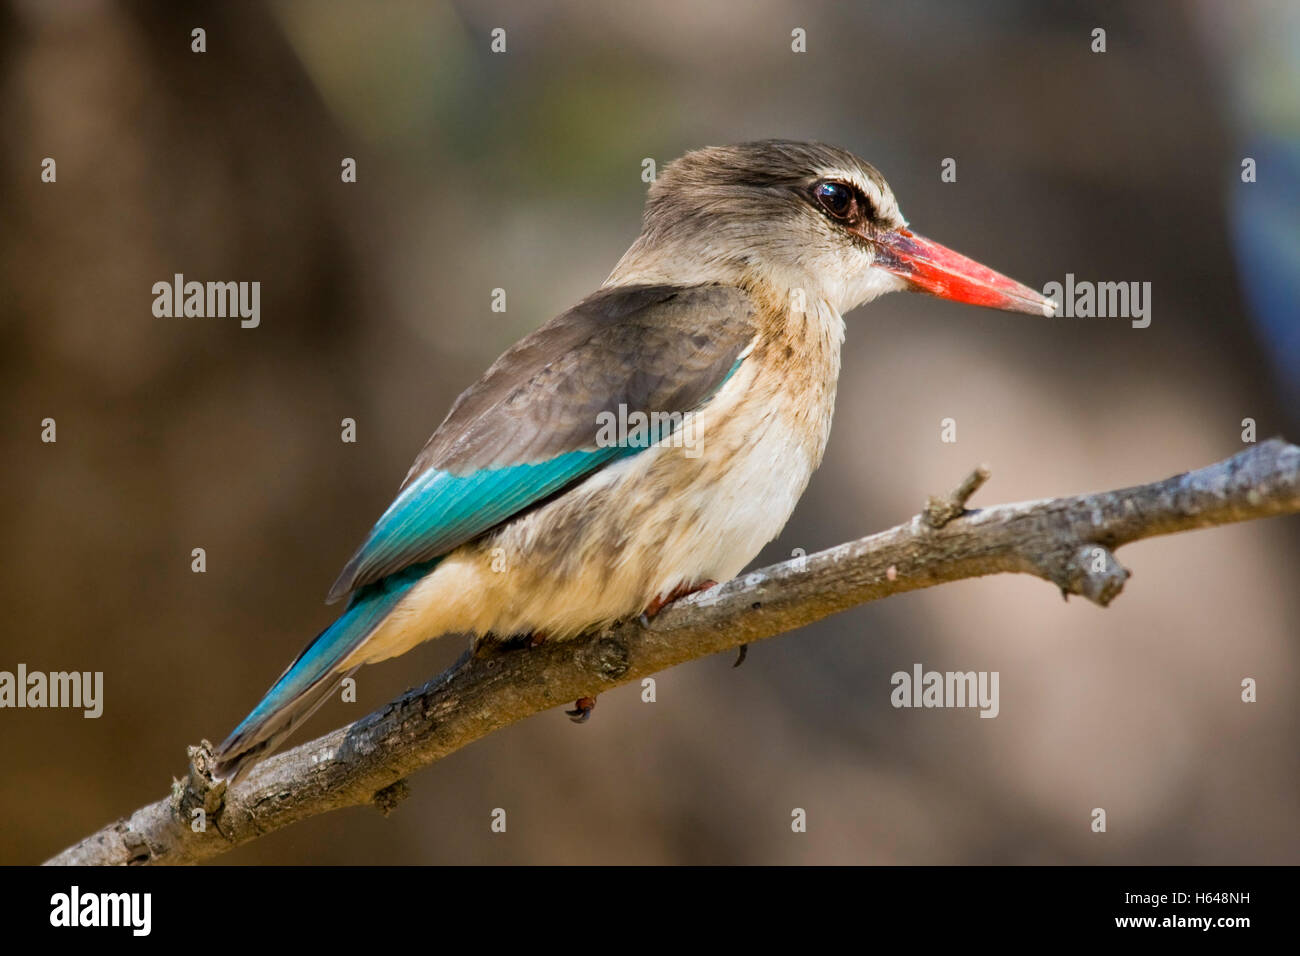 Brown-hooded Kingfisher (Halcyon albiventris), Mkuze National Park, South Africa, Africa Stock Photo